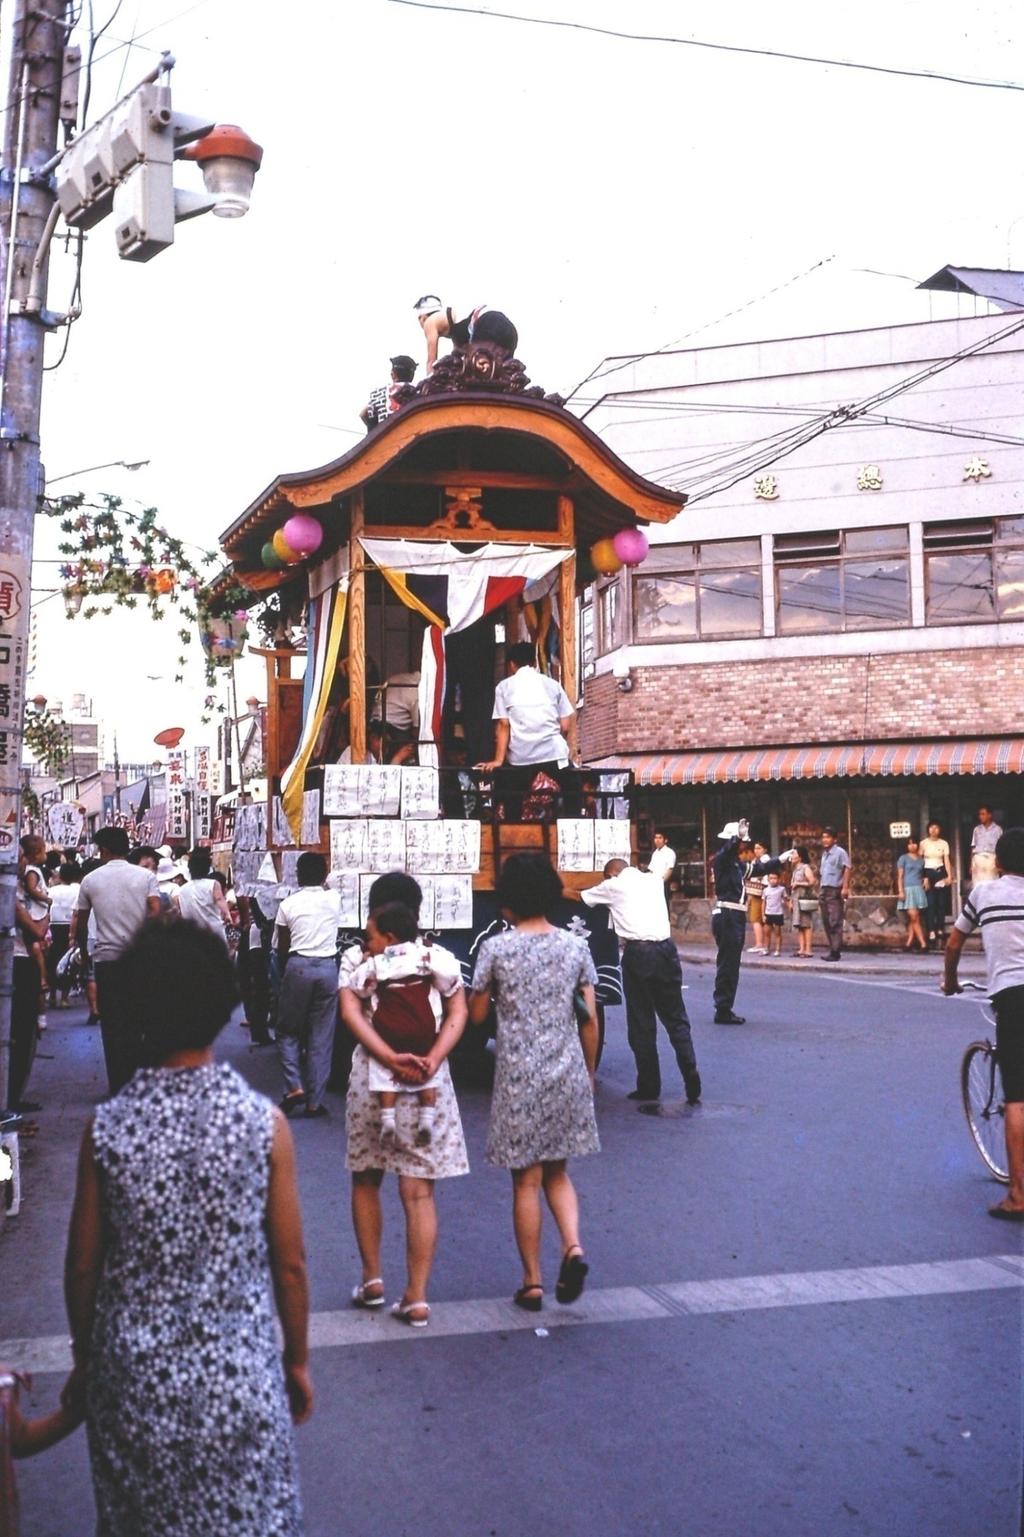 Obon Dashi Matsuri Wheeled Shrines Shrines on wheels (Dashi) are usually pulled and pushed through neighborhood streets to the accompaniment of the sounds of flutes, shakuhachi, Taiko drums,